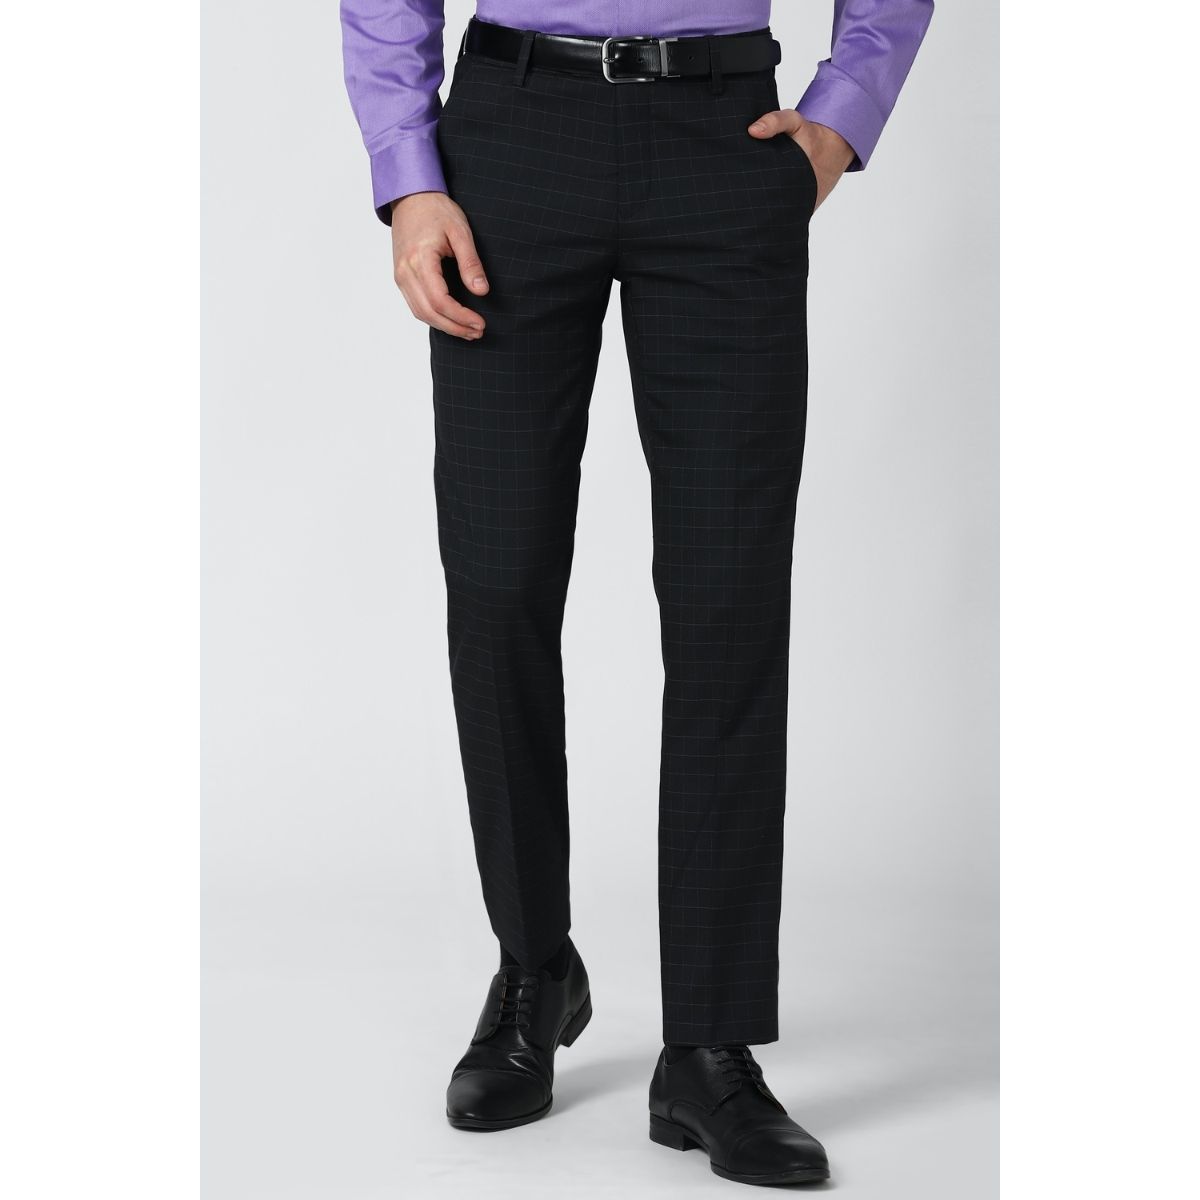 Buy Blue Trousers & Pants for Men by INDEPENDENCE Online | Ajio.com